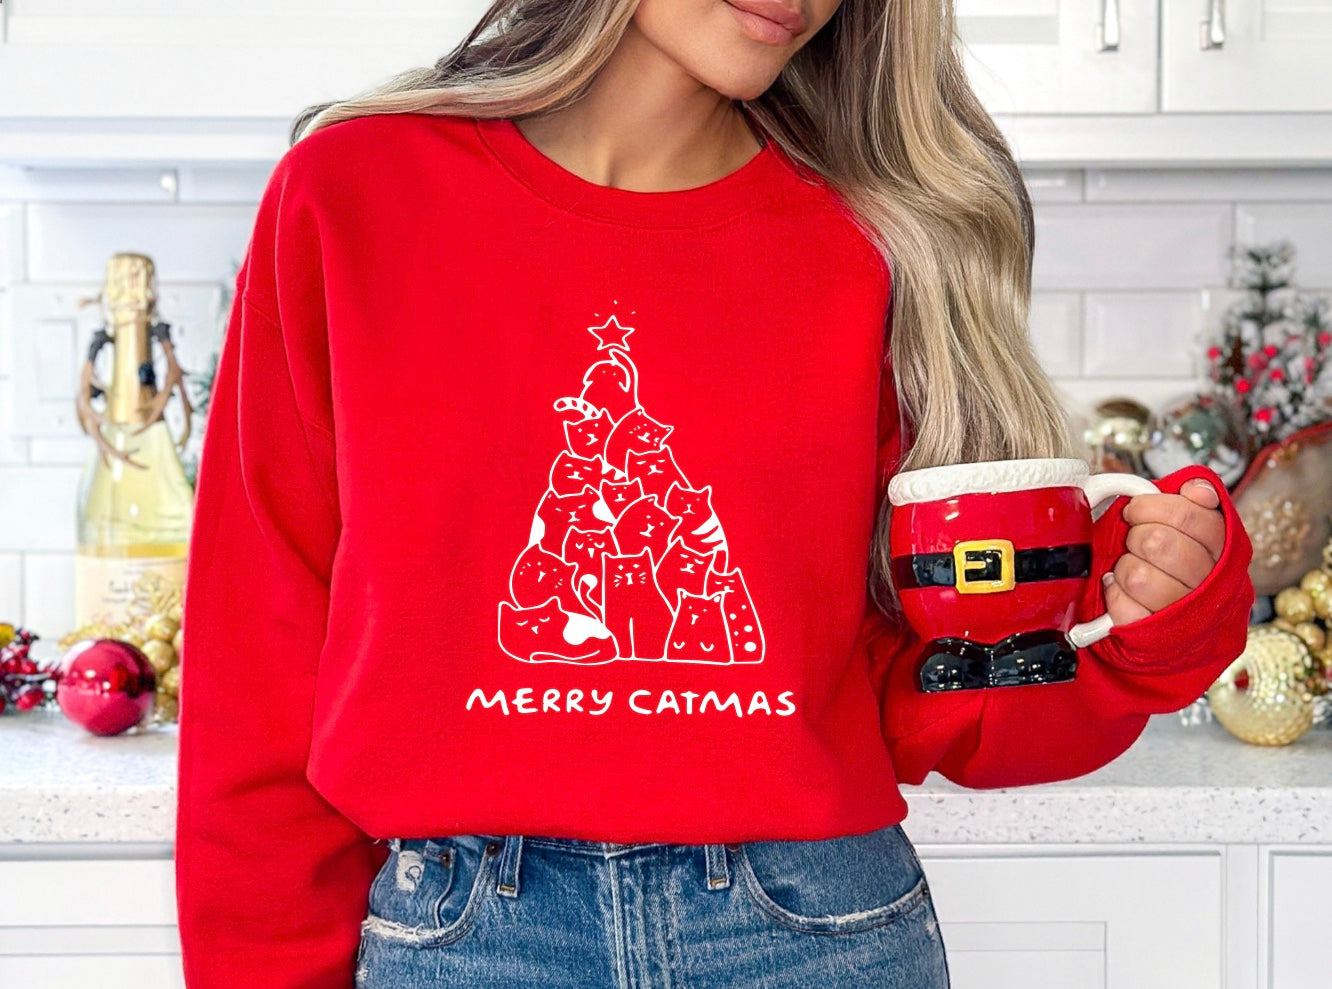 Merry Catmas unisex crewneck sweatshirt in red with white graphic